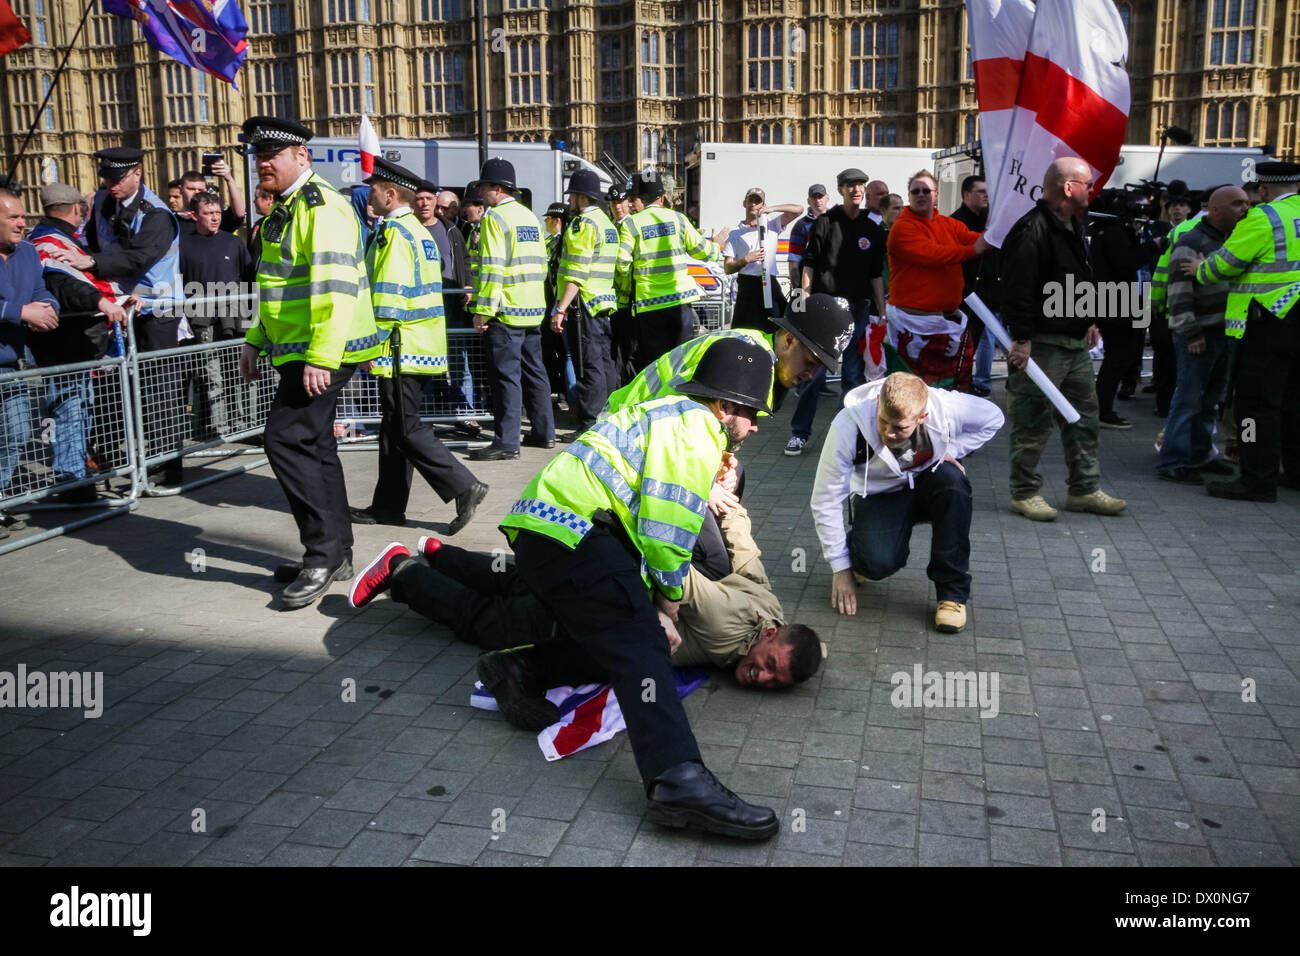 Clashes and arrests during EVF (English Volunteer Forces) protest march in London Stock Photo